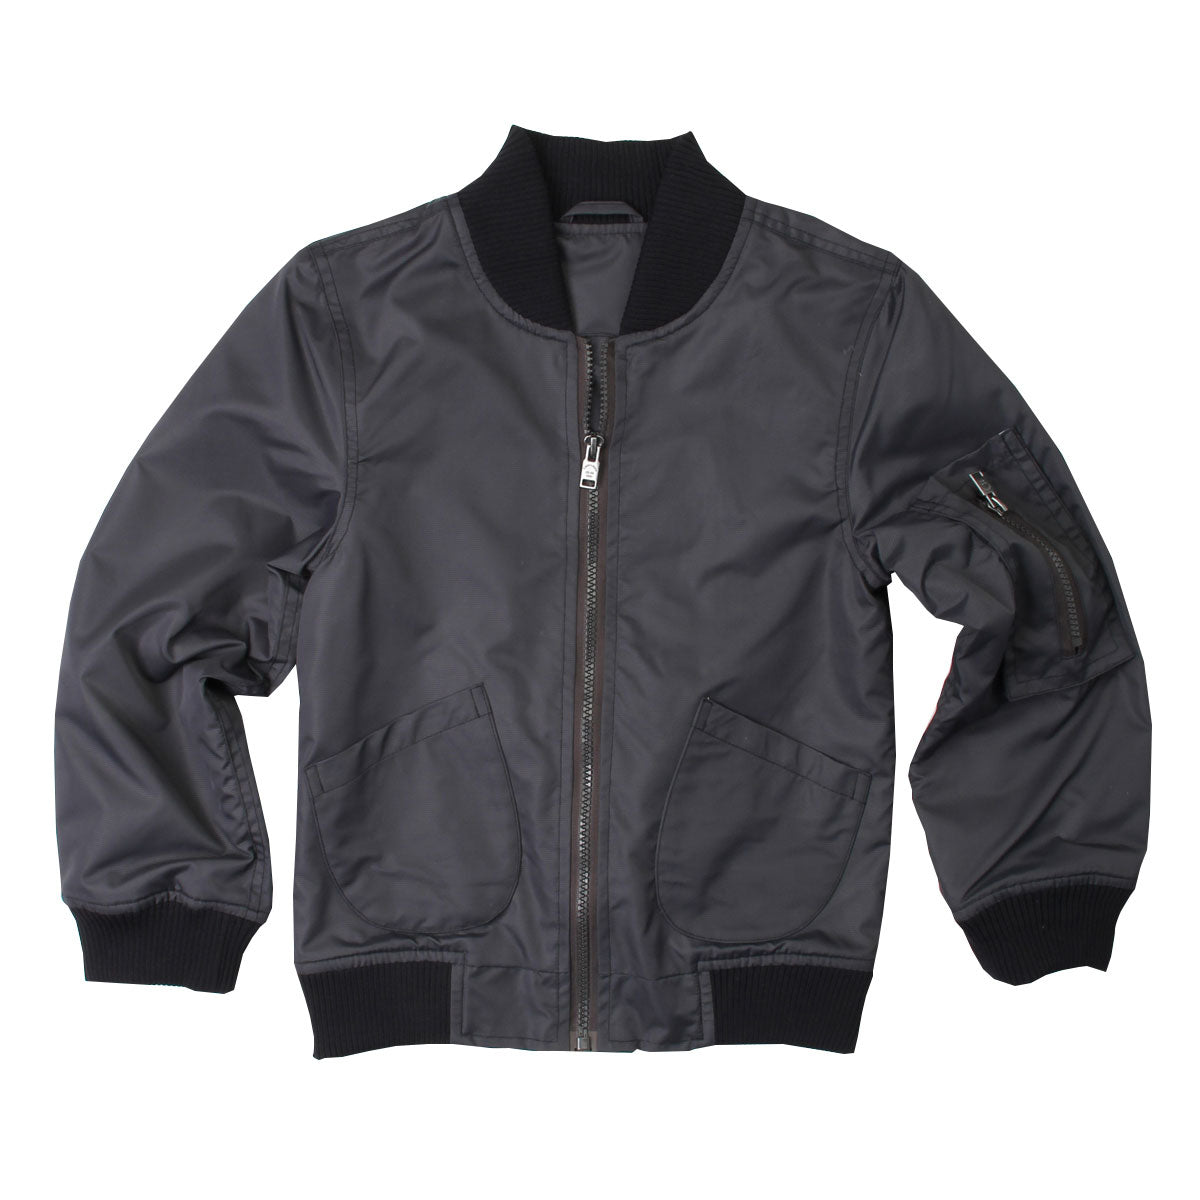 Boys' Nylon Jacket by Wes and Willy